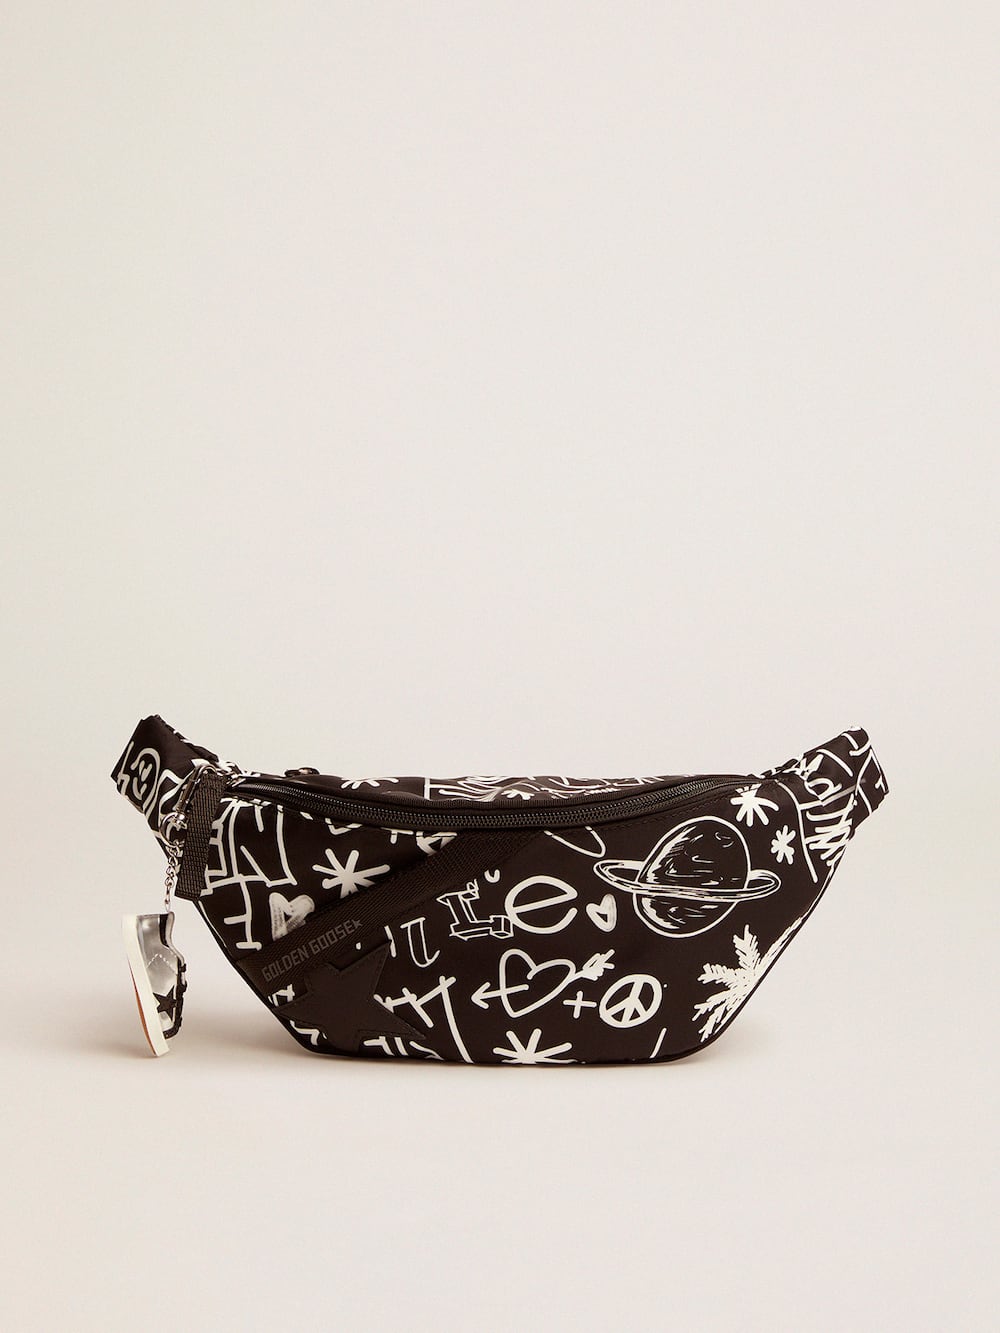 Golden Goose - Journey belt bag in black nylon with contrasting white decorations in 